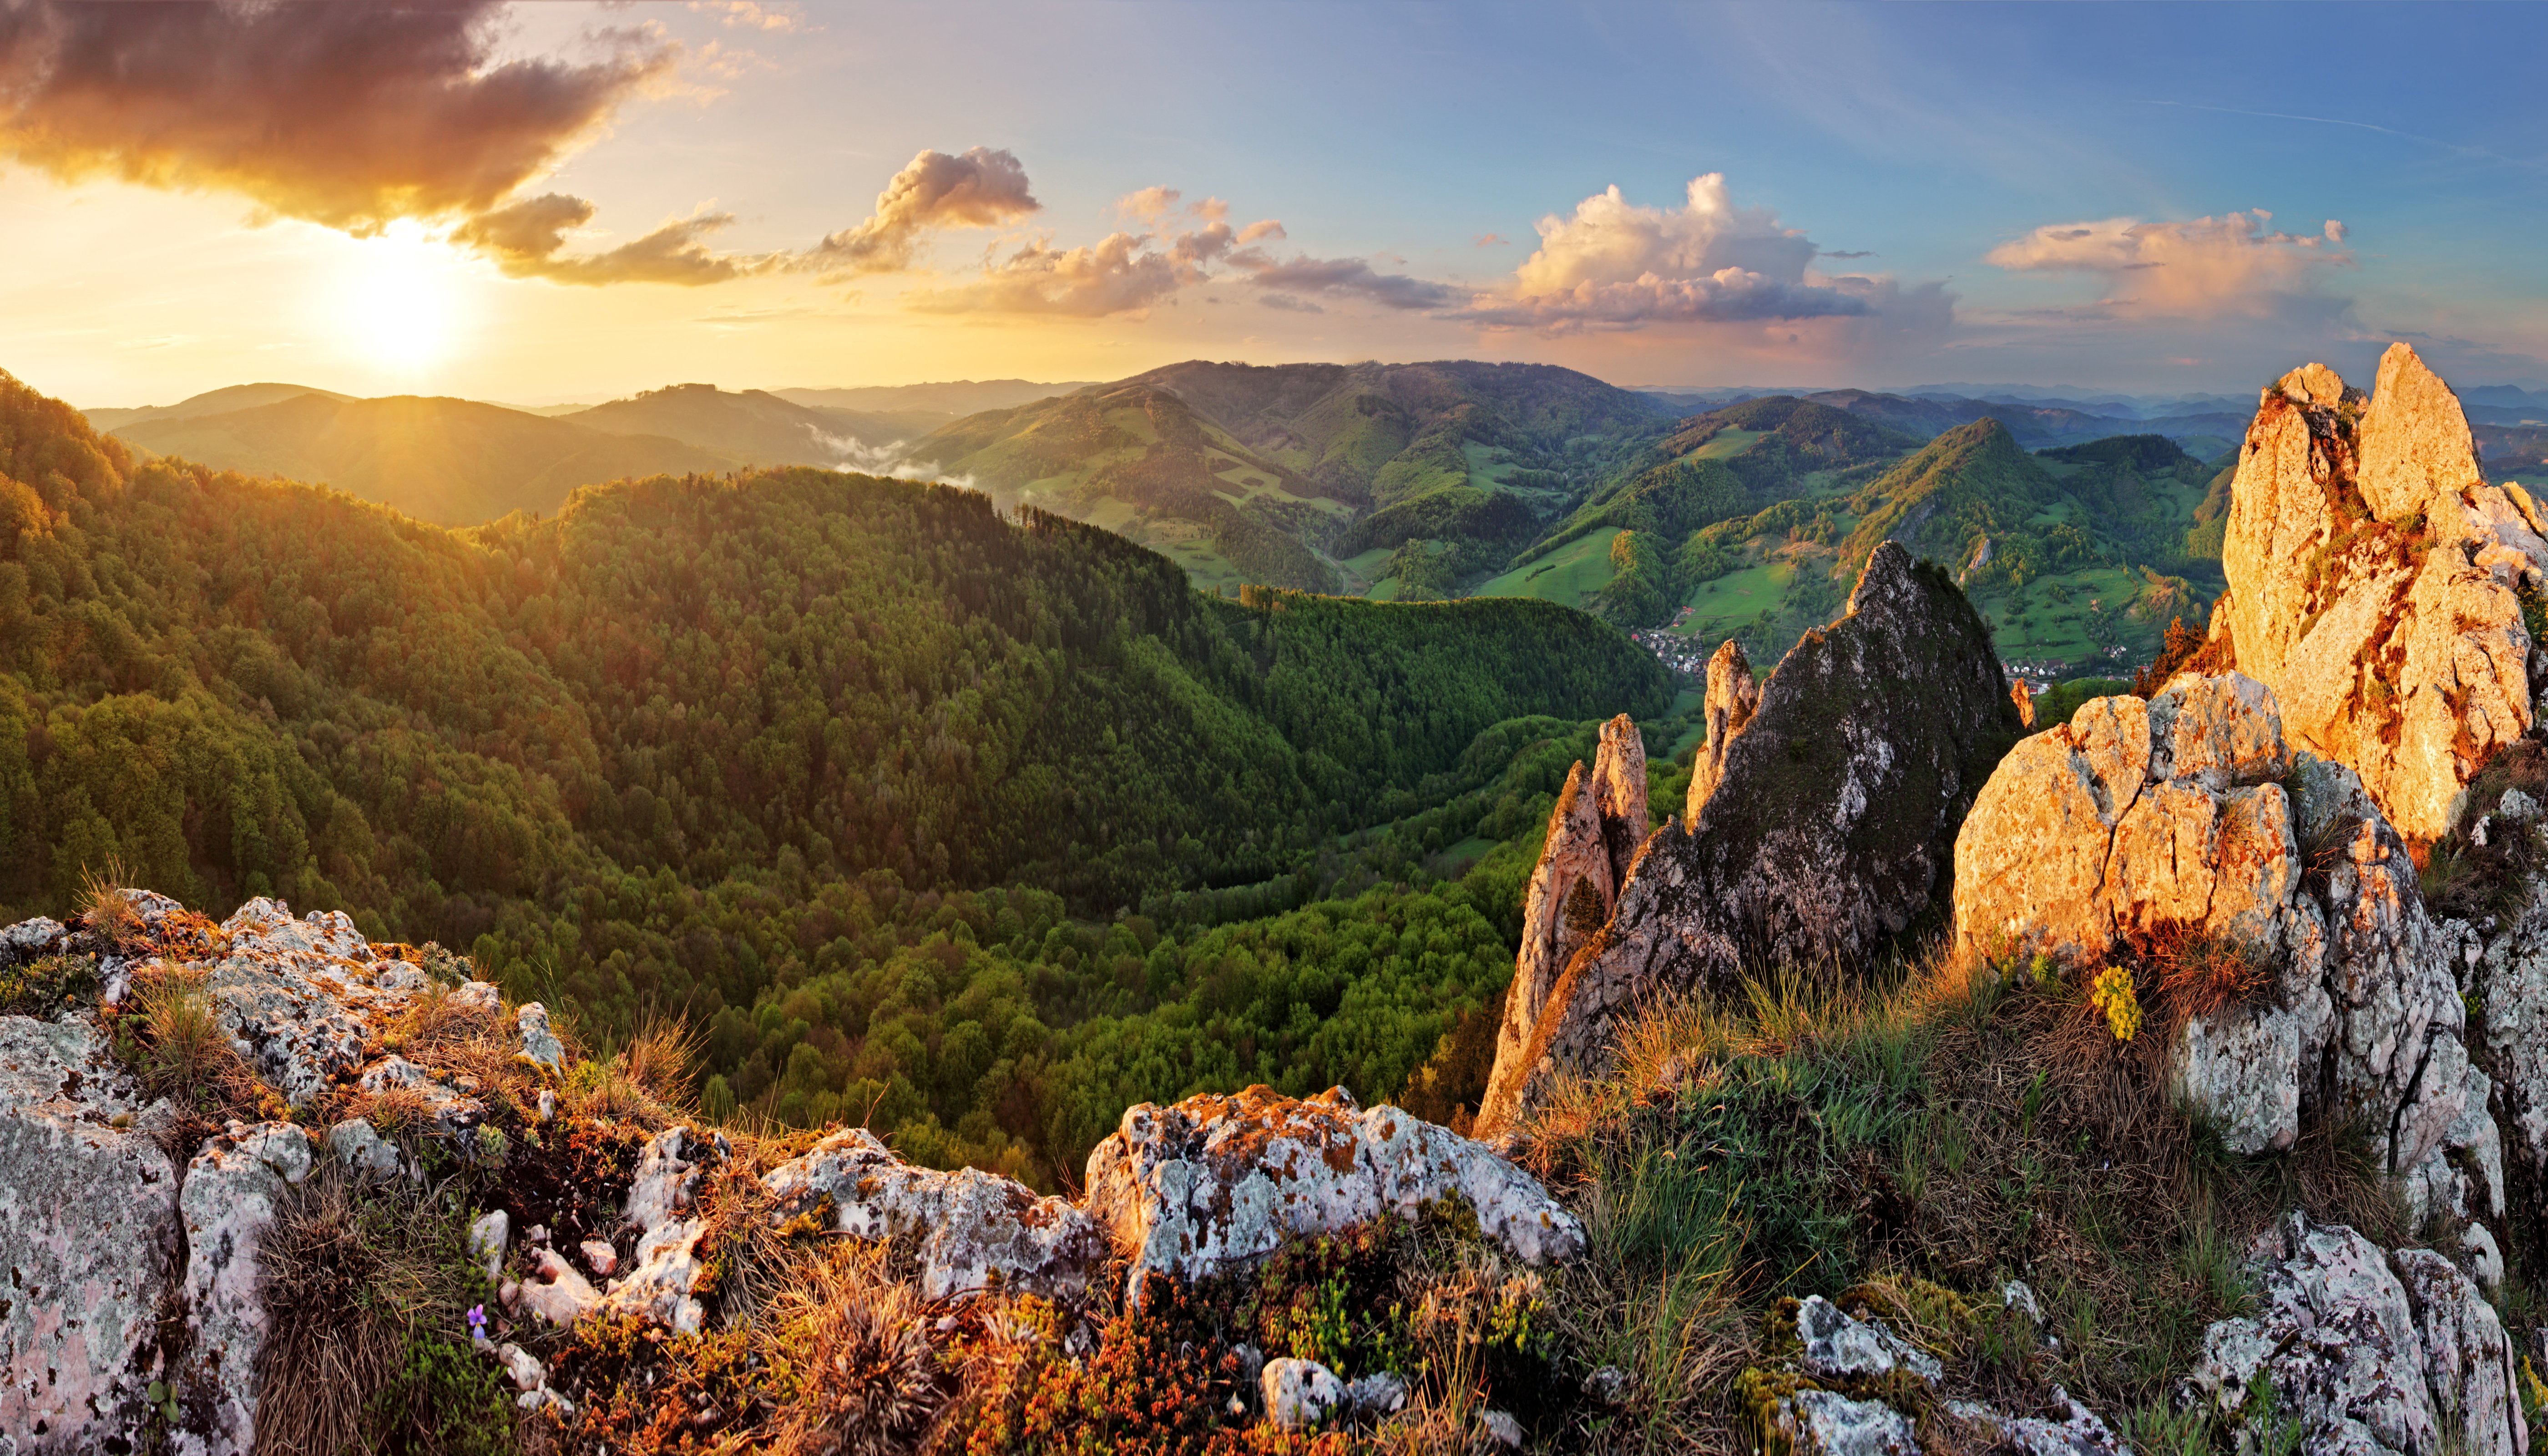 slovakia, Mountains, Sunrises, And, Sunsets, Forests, Scenery Wallpaper